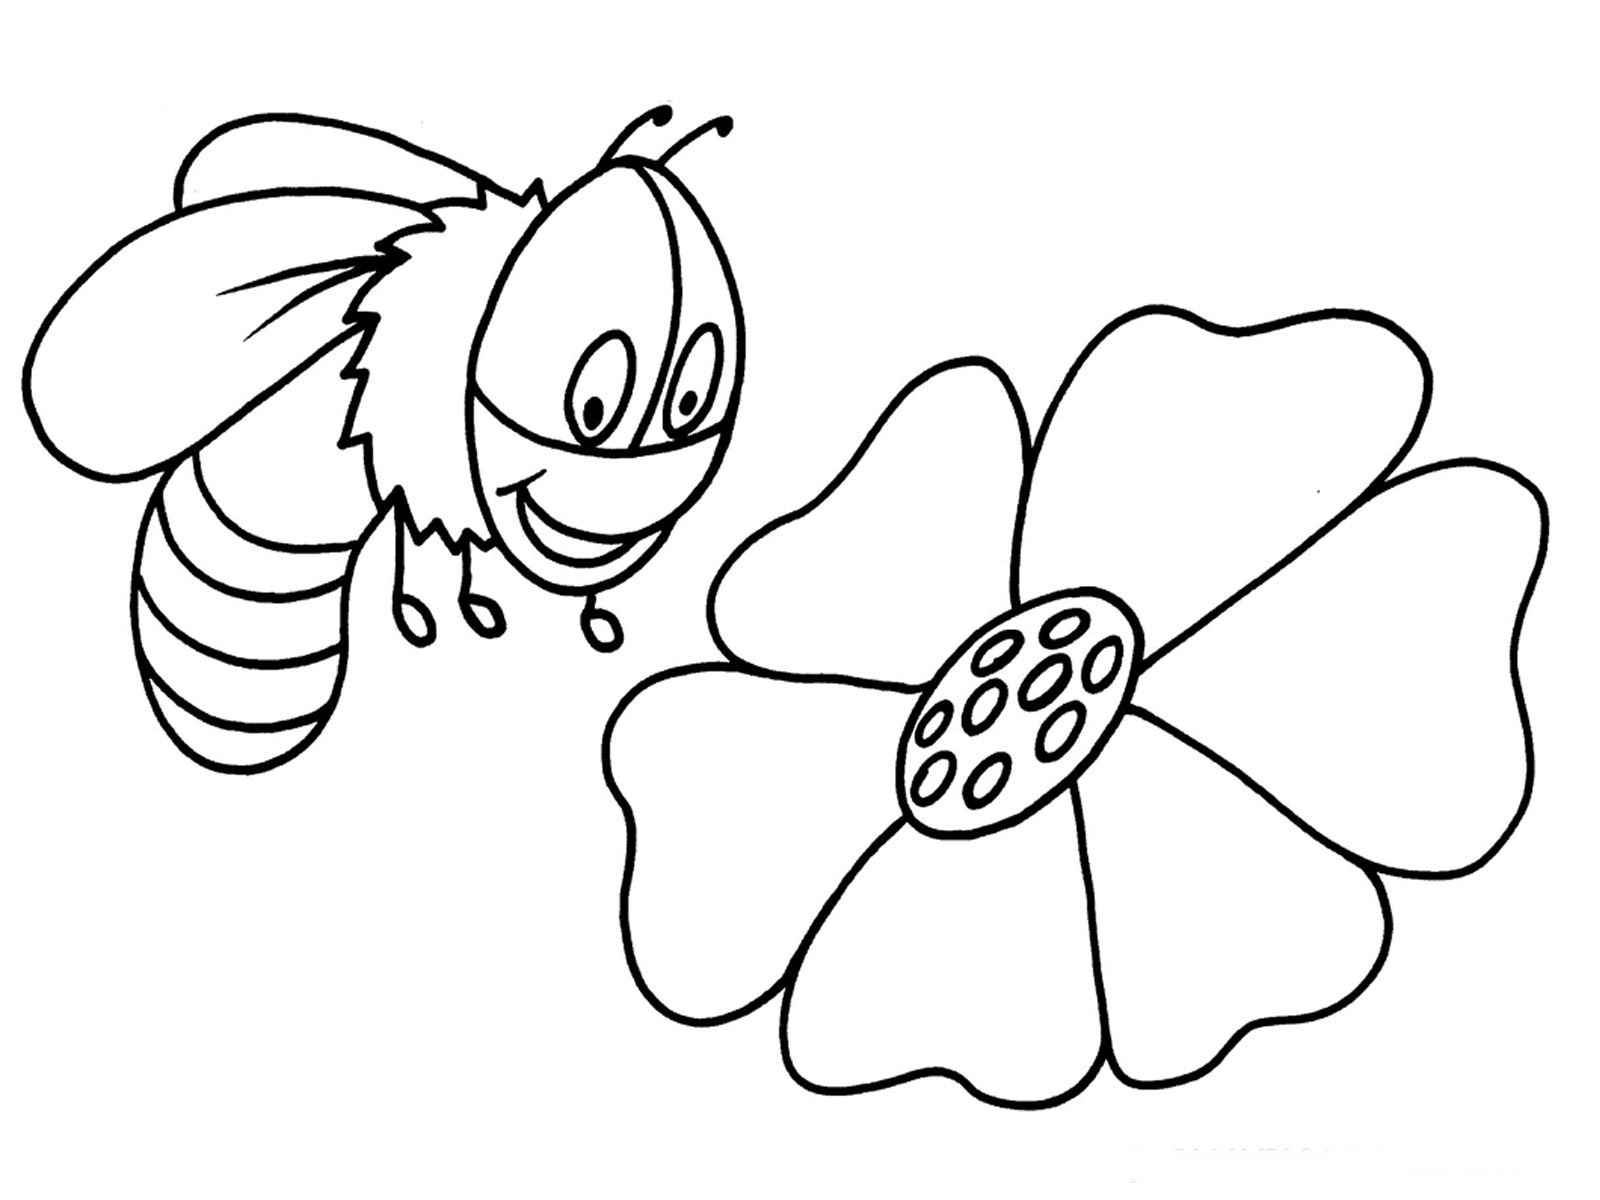 Fascinating alice in wonderland coloring pages caterpillar image ...